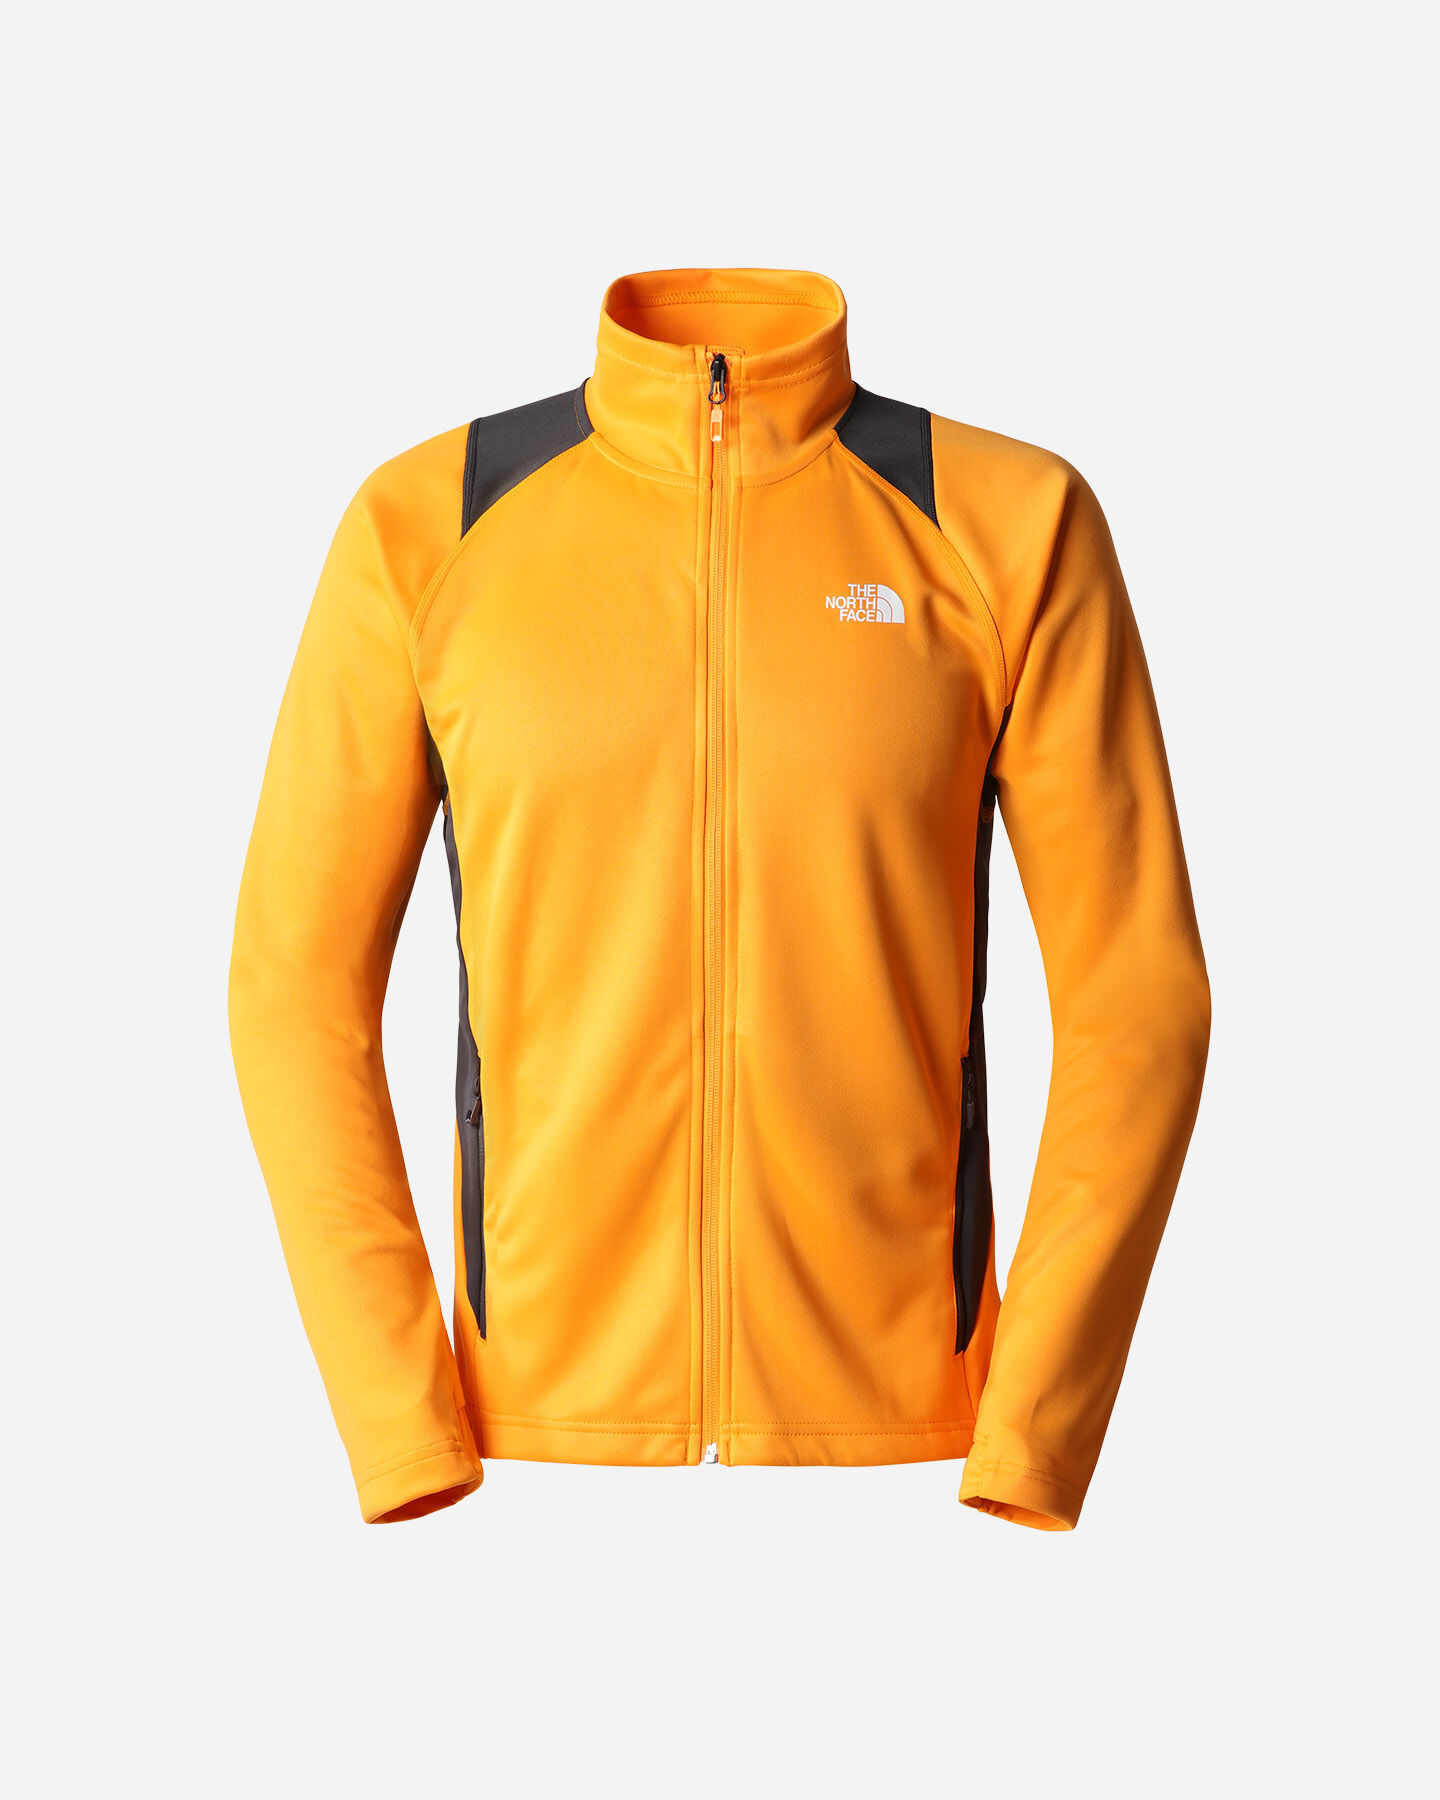  Pile THE NORTH FACE ATHLETIC OUTDOOR MIDLAYER M S5474960|8M6|S scatto 0